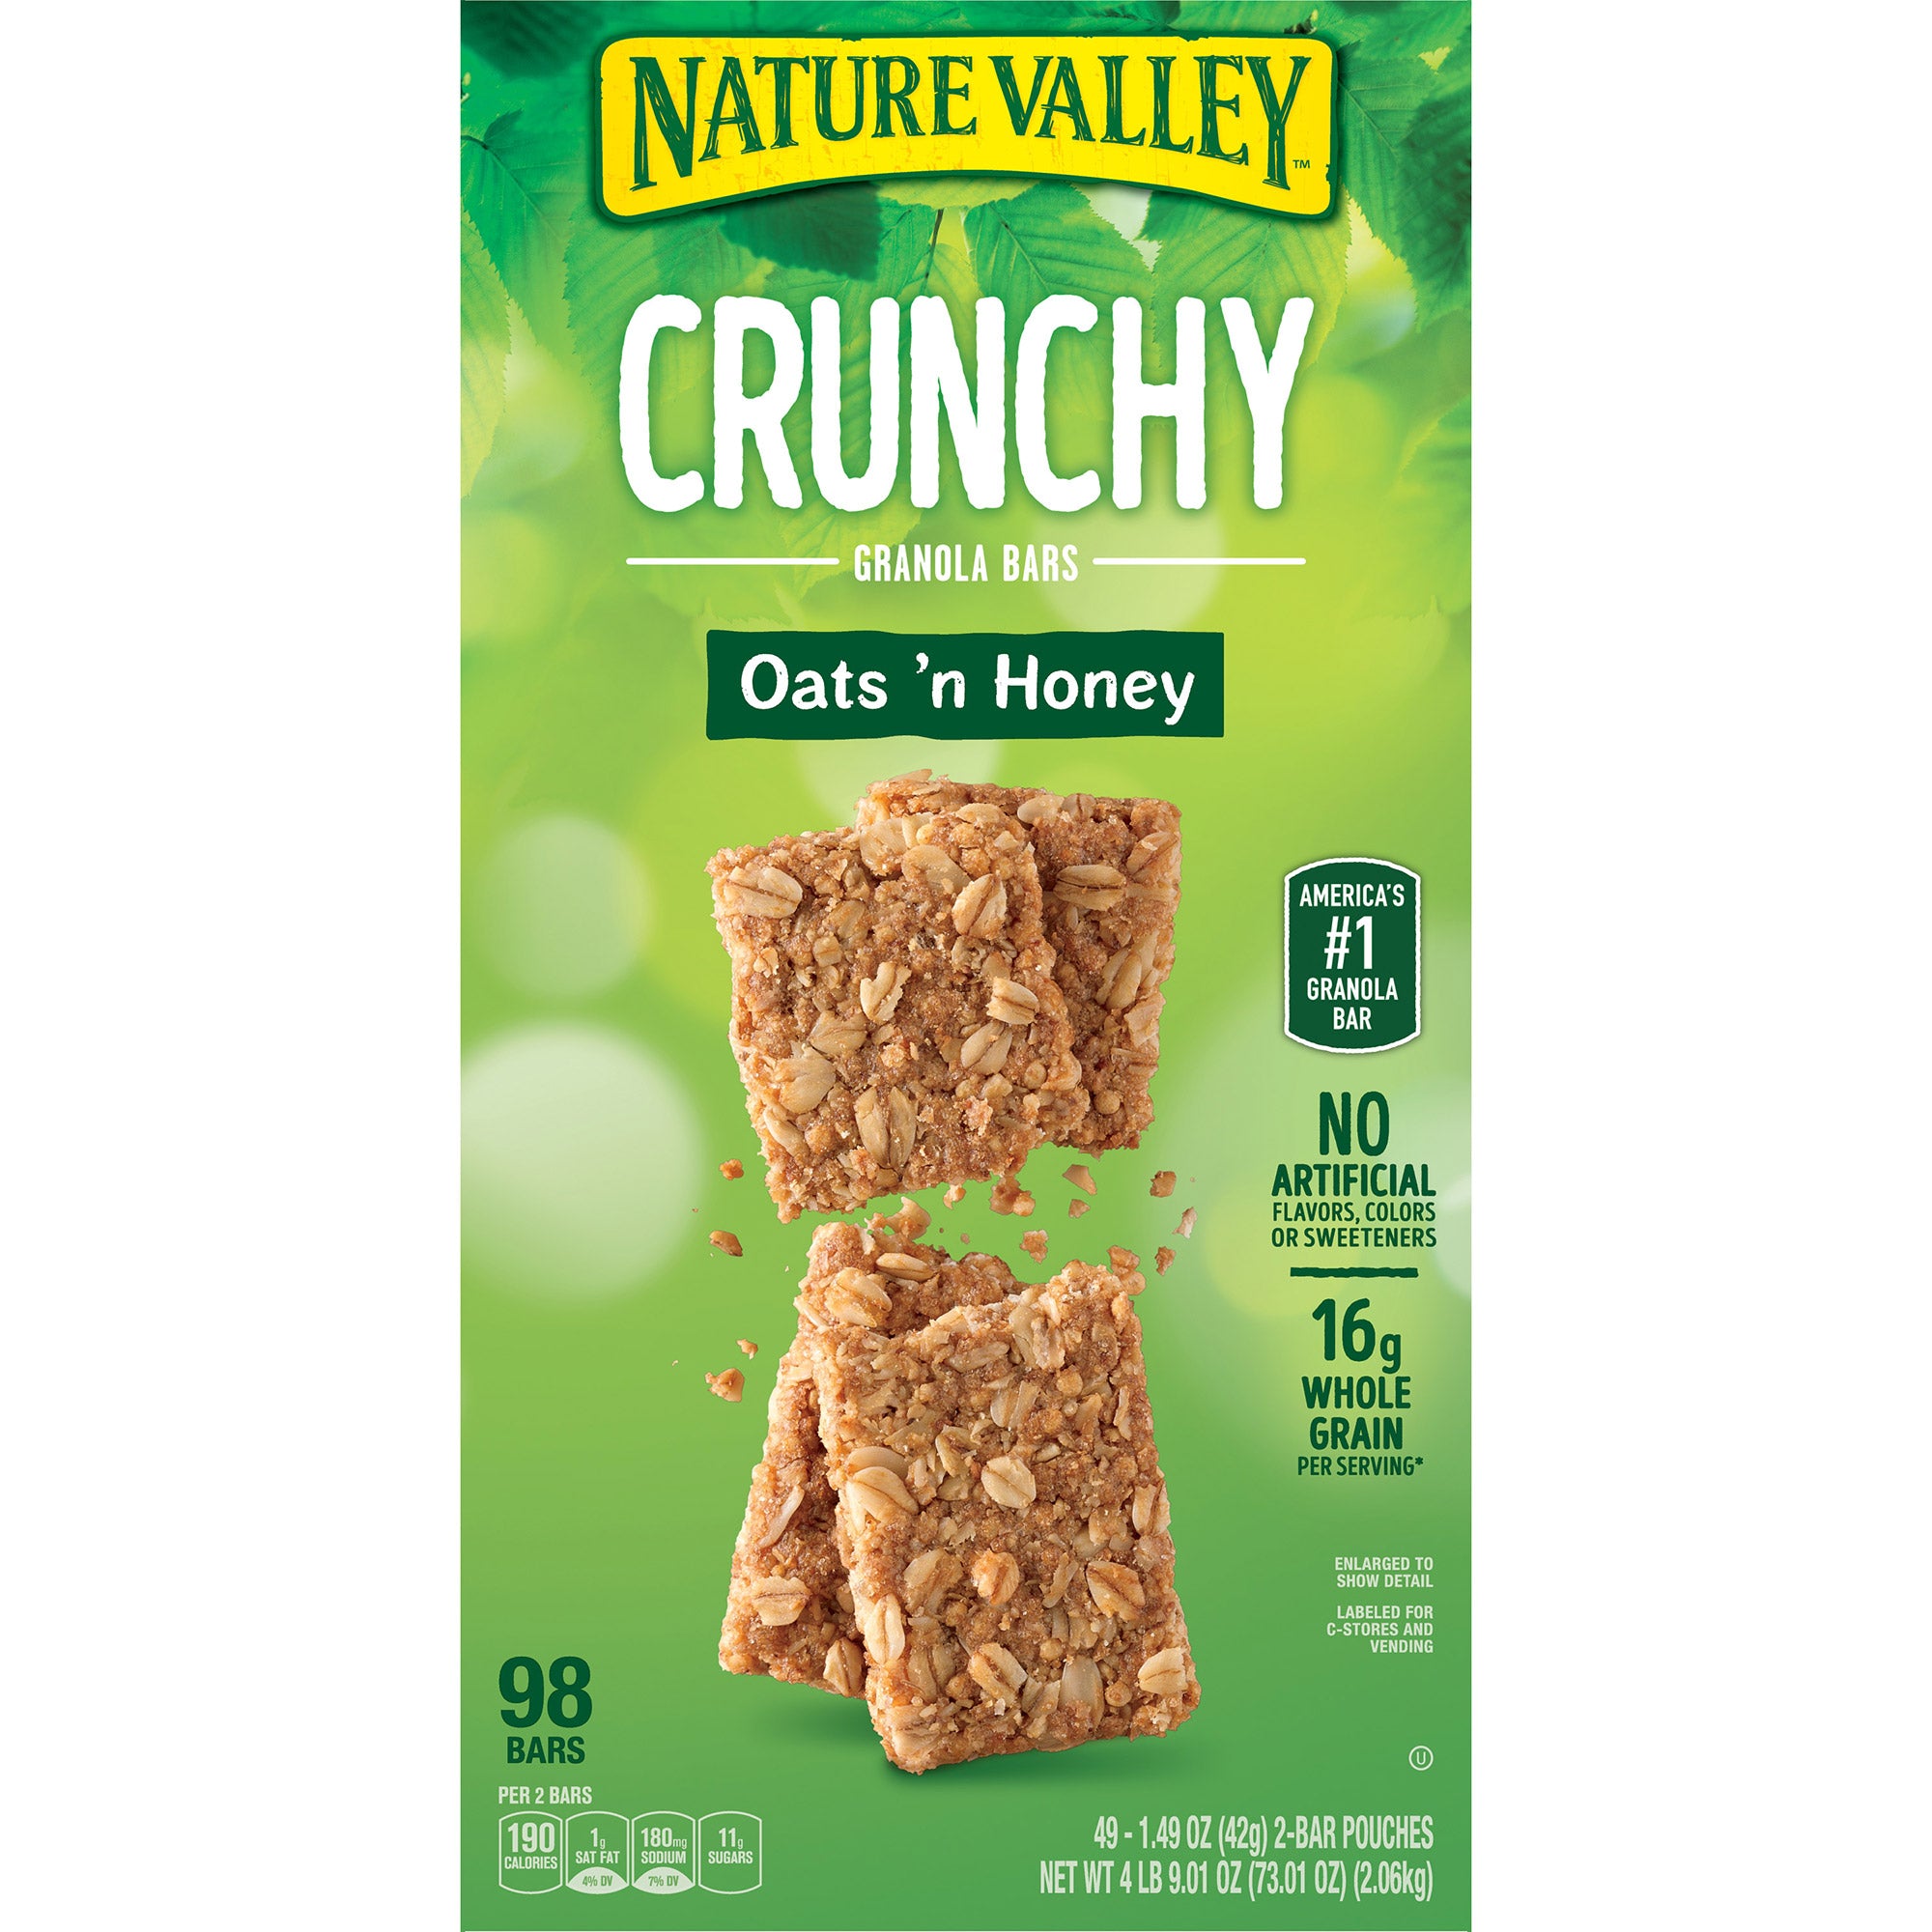 Nature Valley Crunchy Oats'n Honey Granola Bars, 98-count